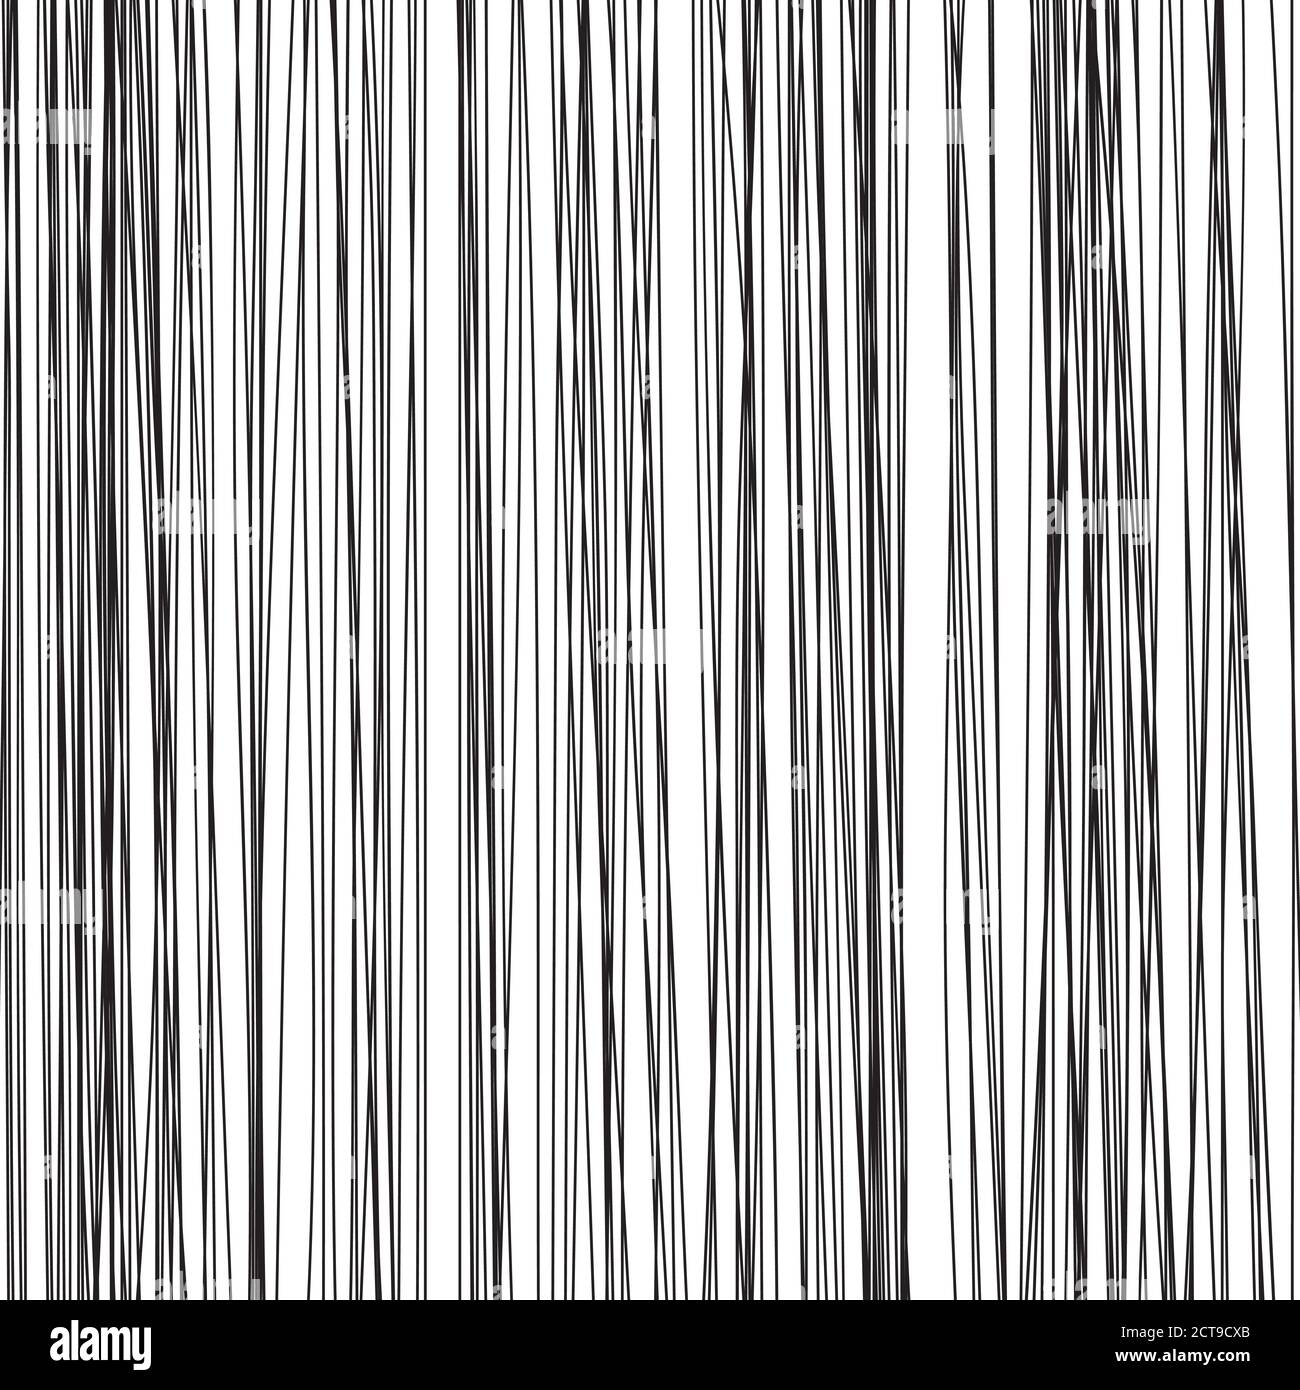 pattern with vertical black lines Stock Vector